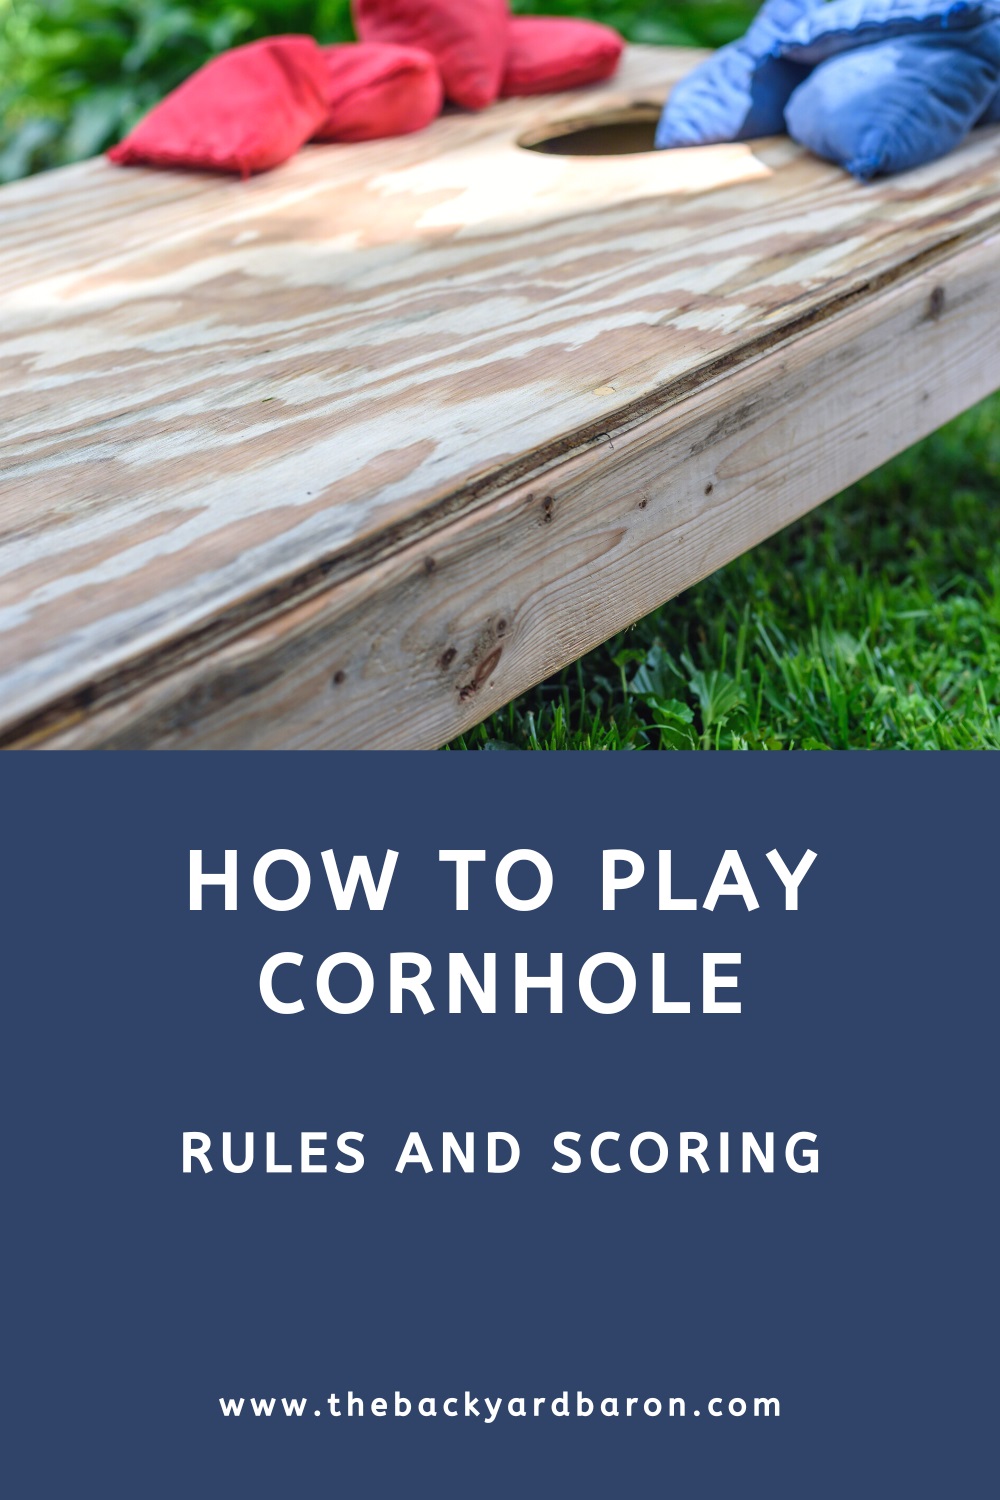 How to play cornhole (beginners guide)